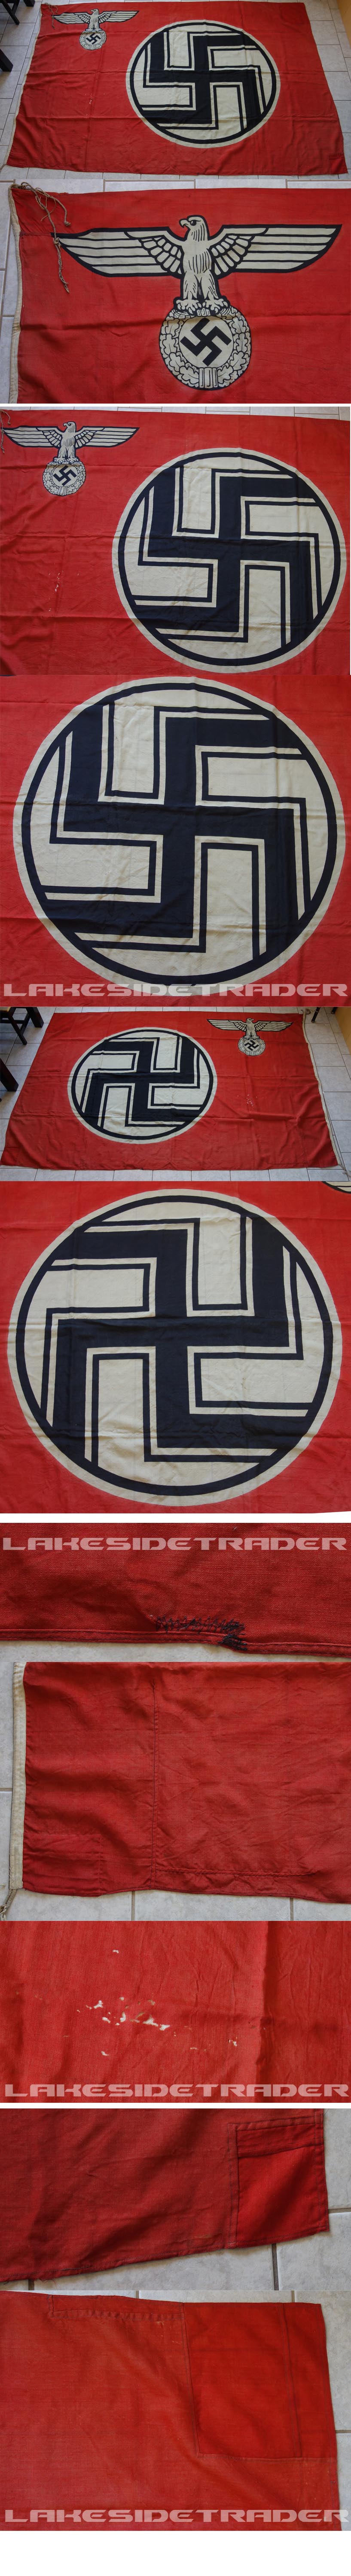 Large State Service Flag